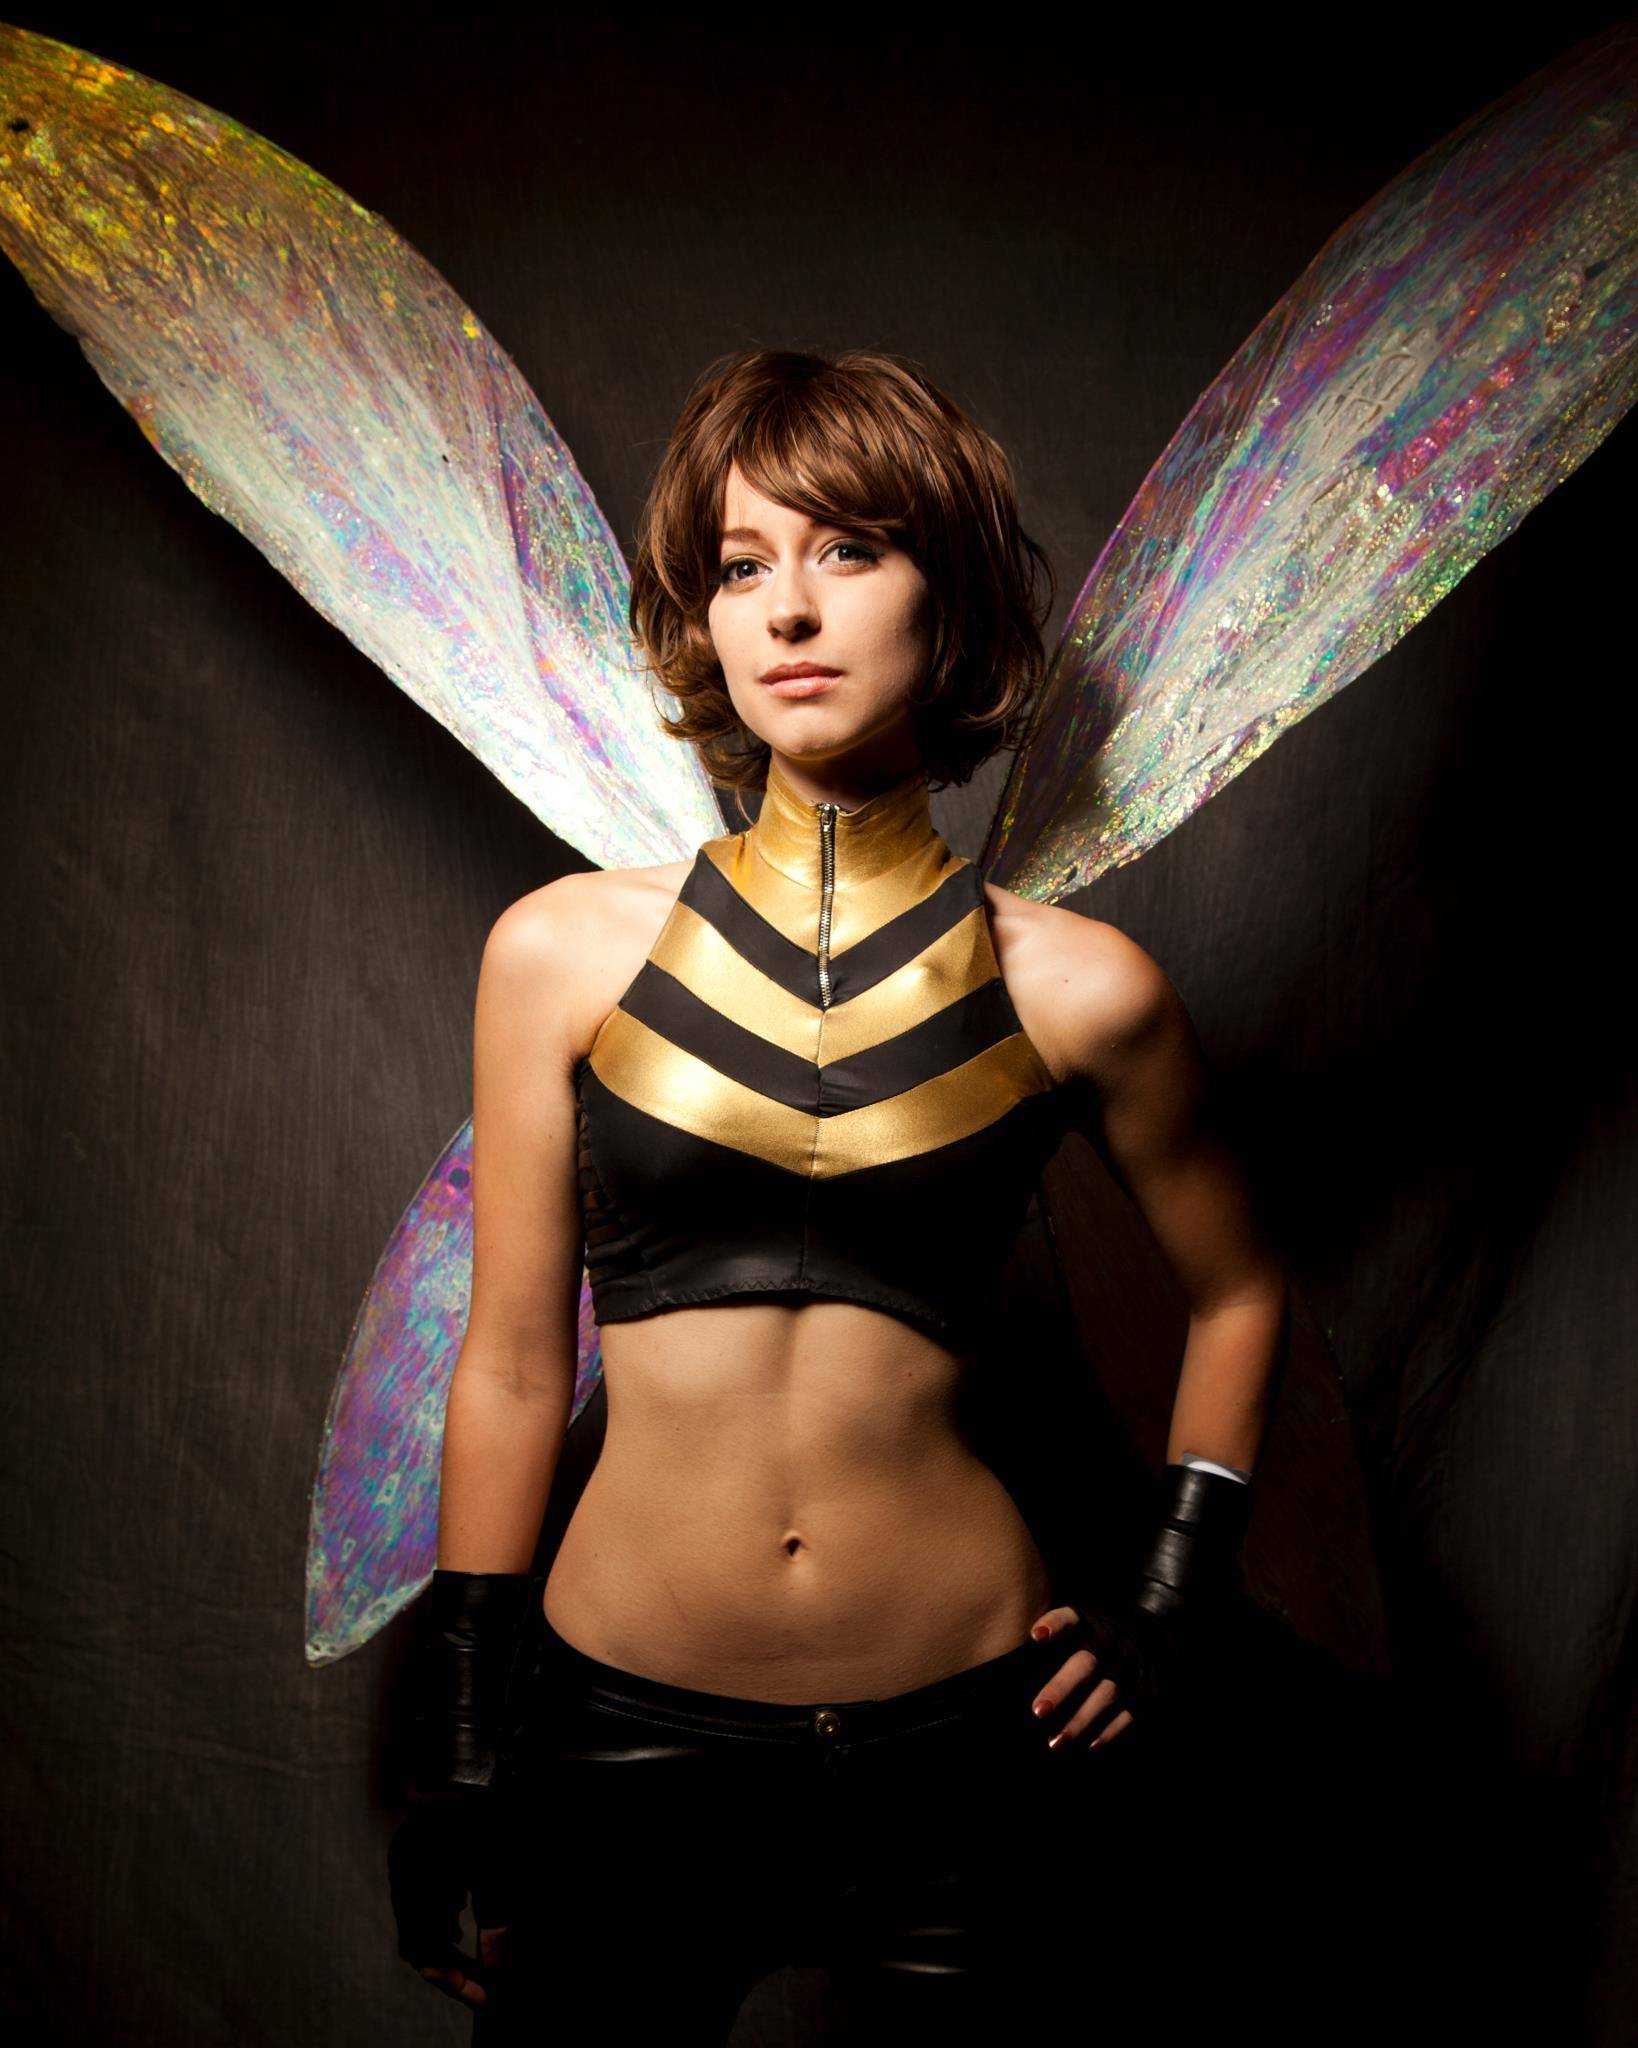 51 Hot Pictures Of Wasp That Will Fill Your Heart With Joy A Success | Best Of Comic Books